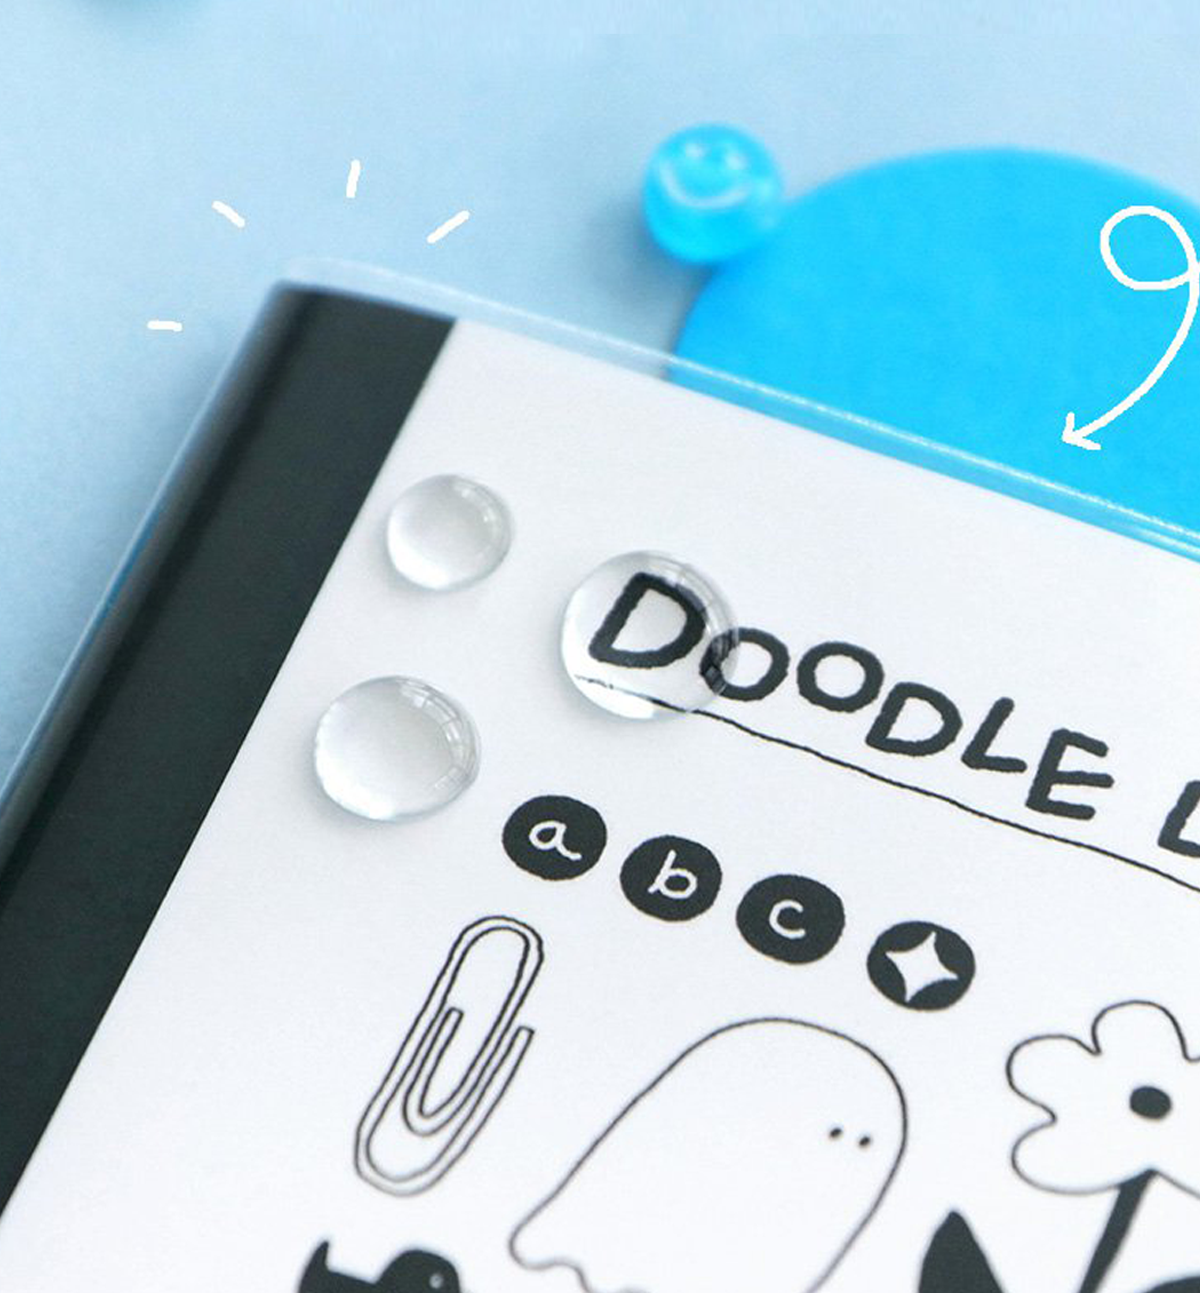 Doodle Daily Note Planner [1 Month]